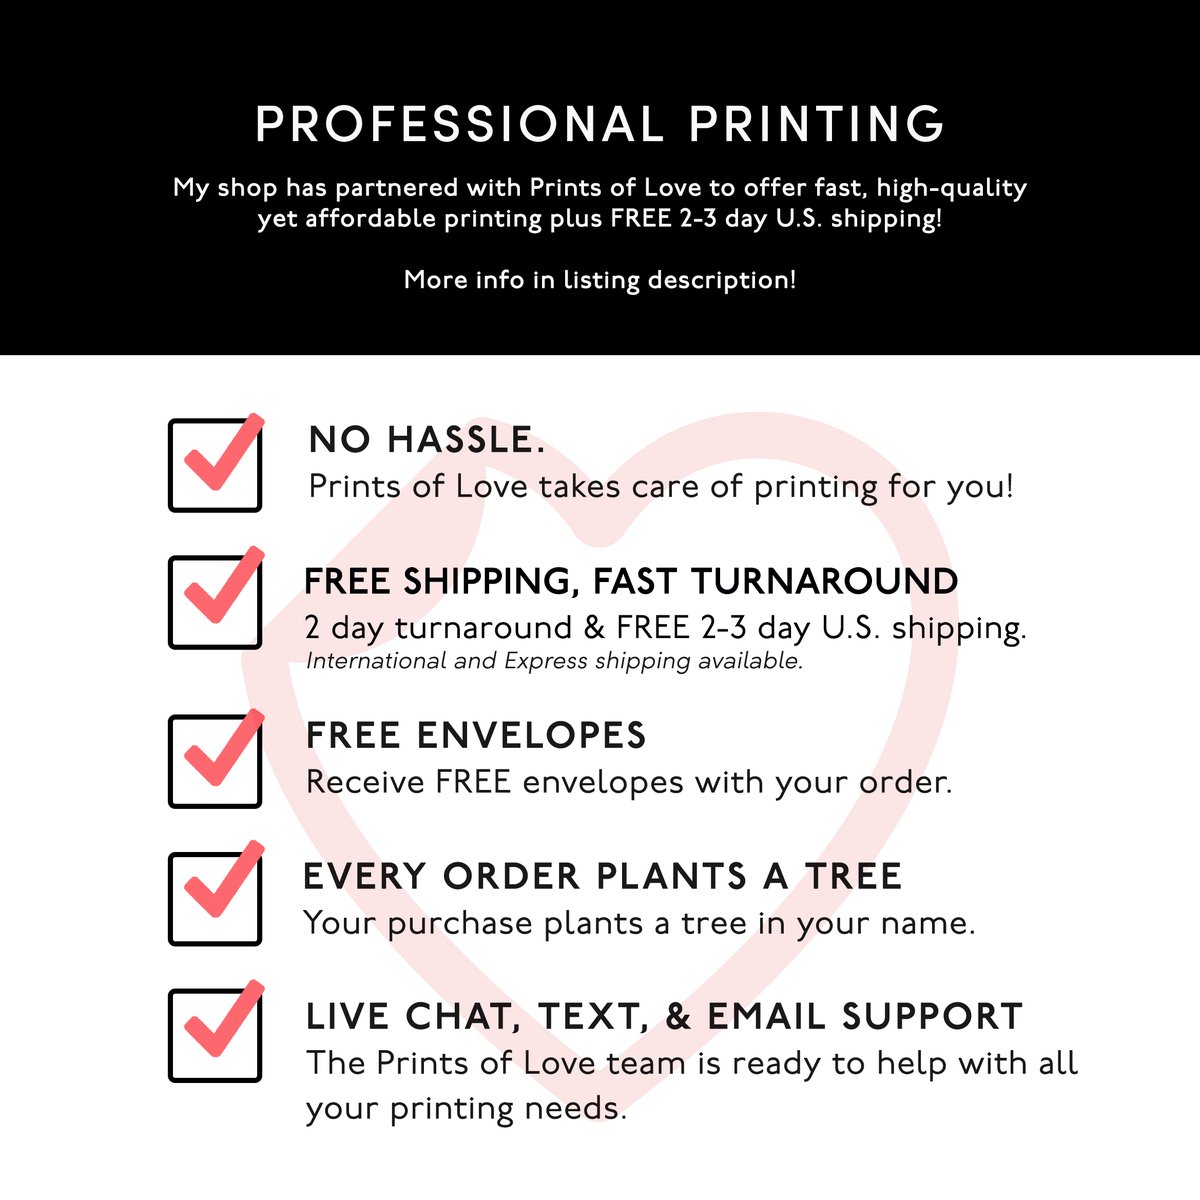 Ready to print your own wall art, card, stickers or outdoor signage? Use code 'STS10' at Prints of Love for 10% off your order of $49 or more! printsoflove.com/ref/STSPrintab…